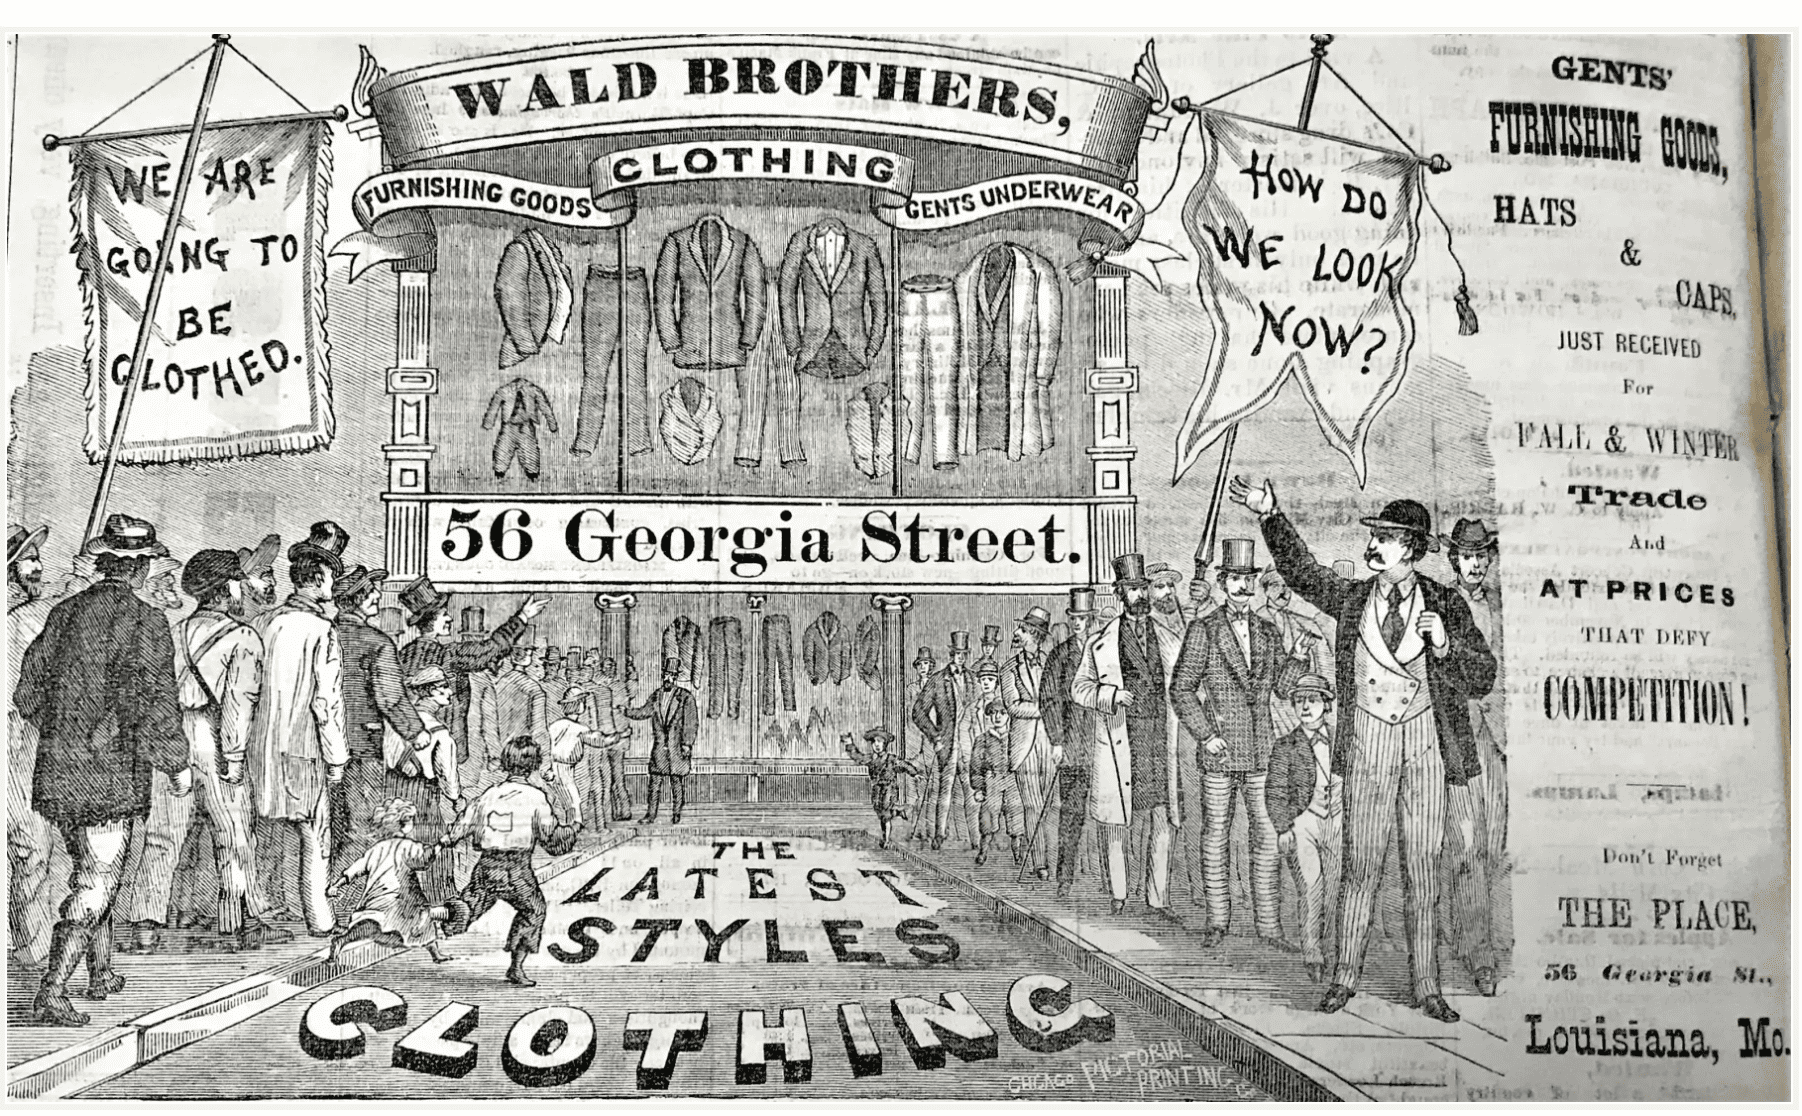 An advertisement in the “Louisiana Press Journal” for the Wald Brothers Department Store in Louisiana, Mo. Credit: St. Louis Jewish Light.